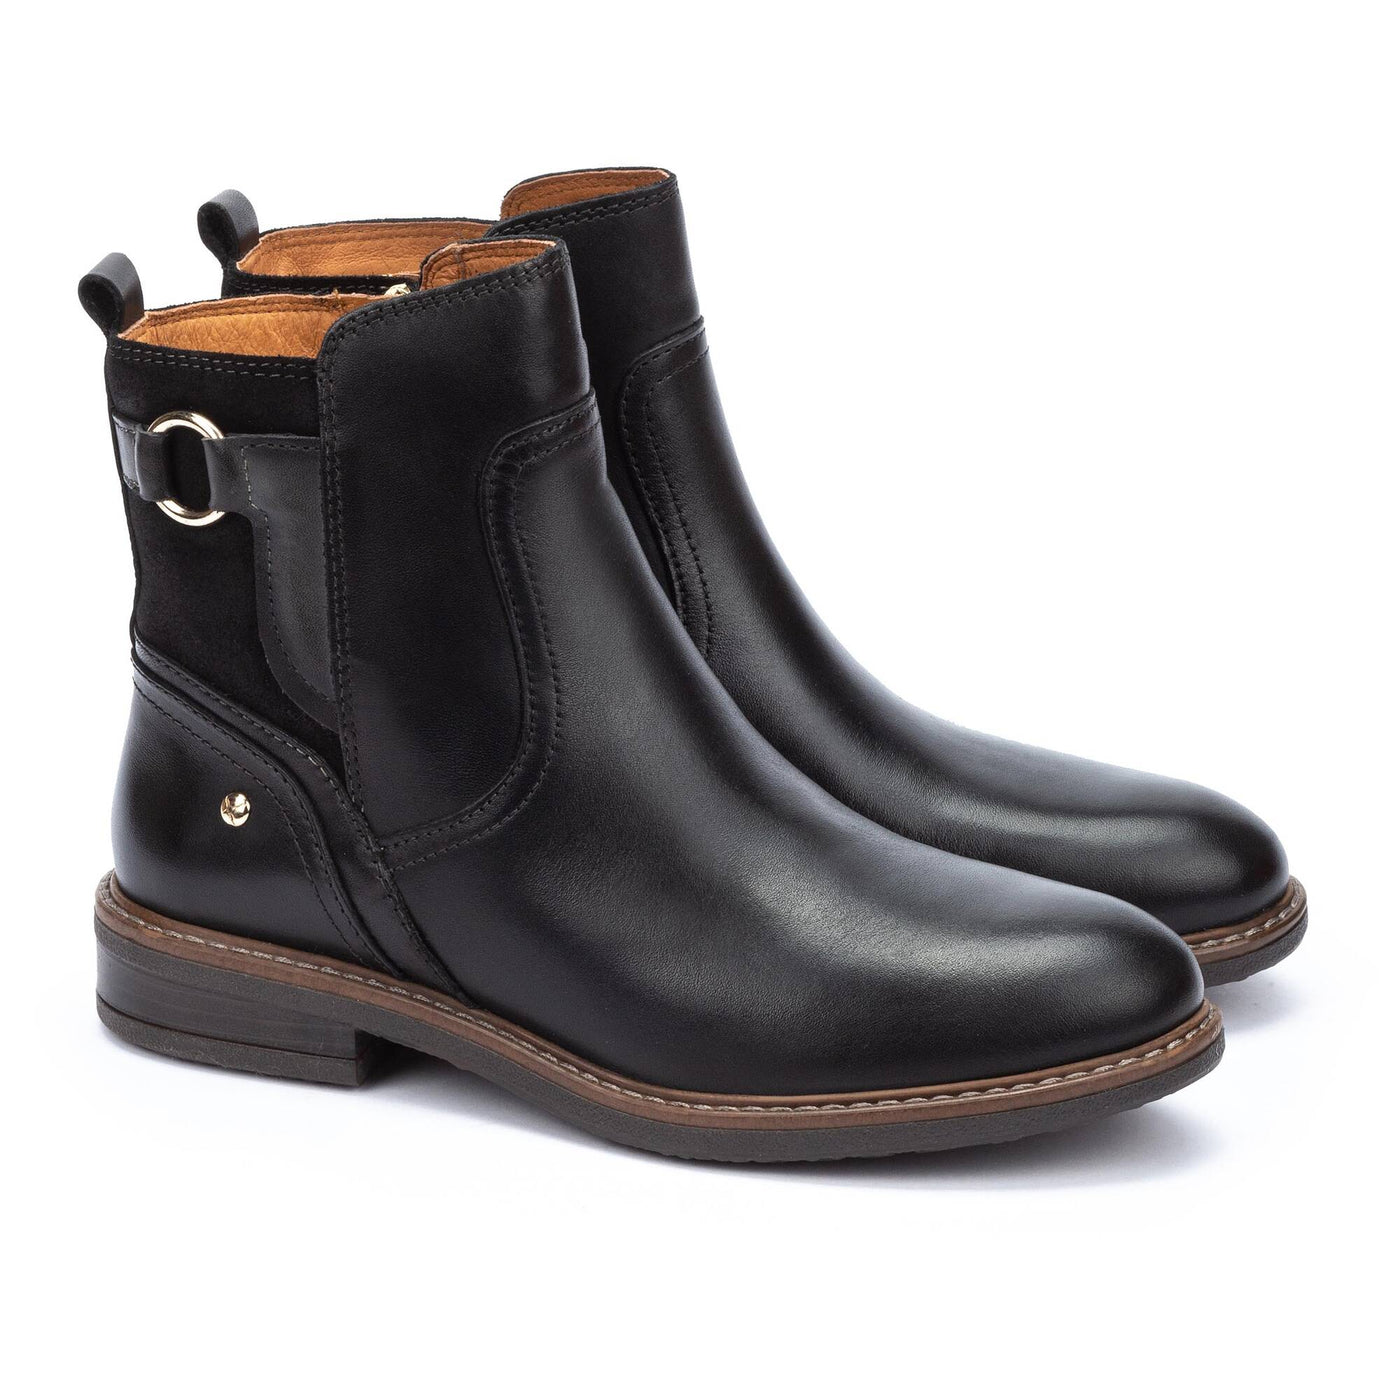 Aldaya Classic High Ankle Boots